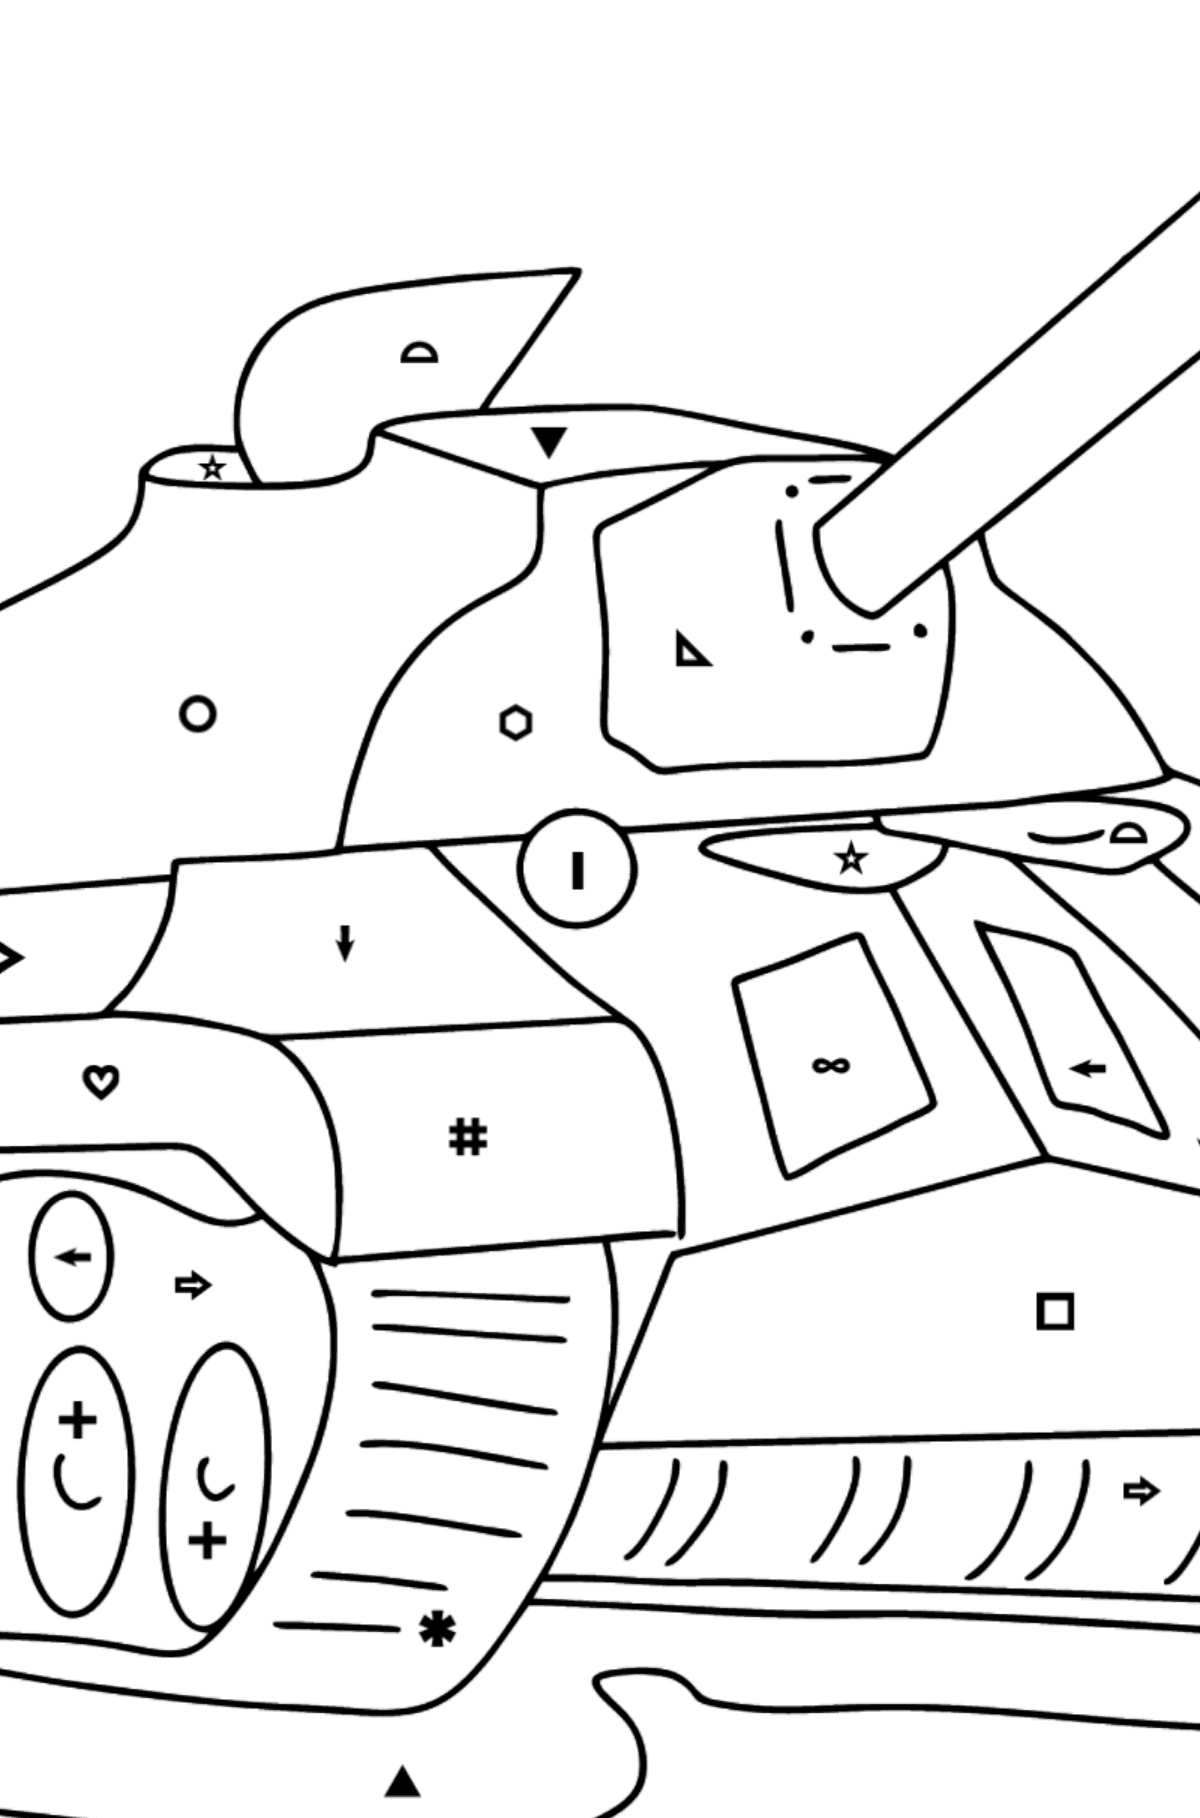 Tank IS 3 coloring page - Coloring by Symbols and Geometric Shapes for Kids